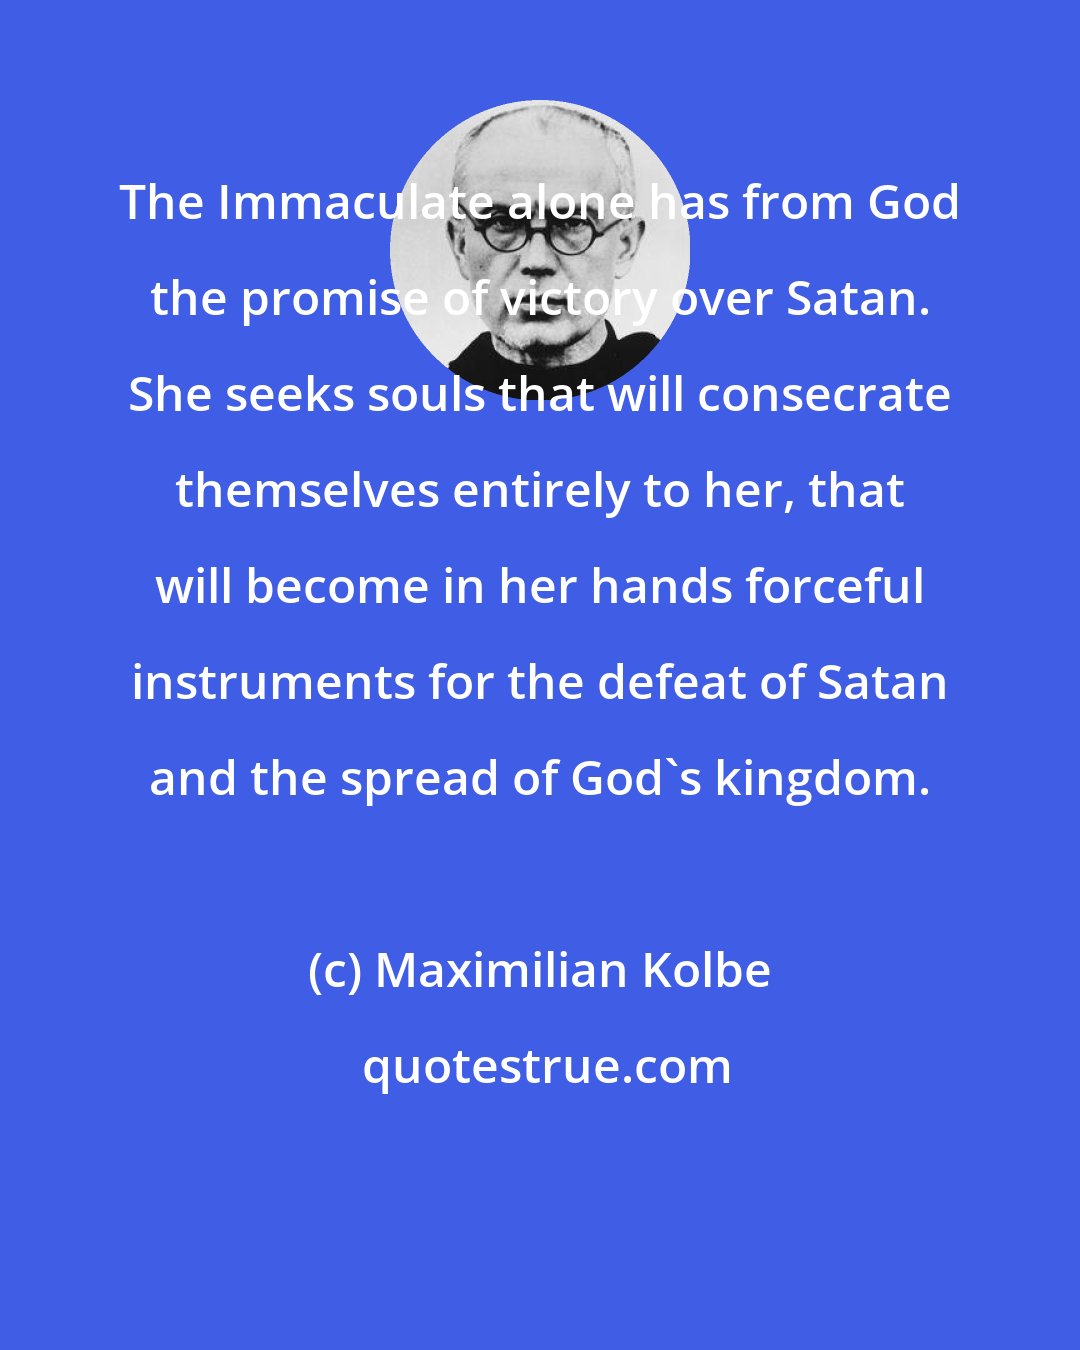 Maximilian Kolbe: The Immaculate alone has from God the promise of victory over Satan. She seeks souls that will consecrate themselves entirely to her, that will become in her hands forceful instruments for the defeat of Satan and the spread of God's kingdom.